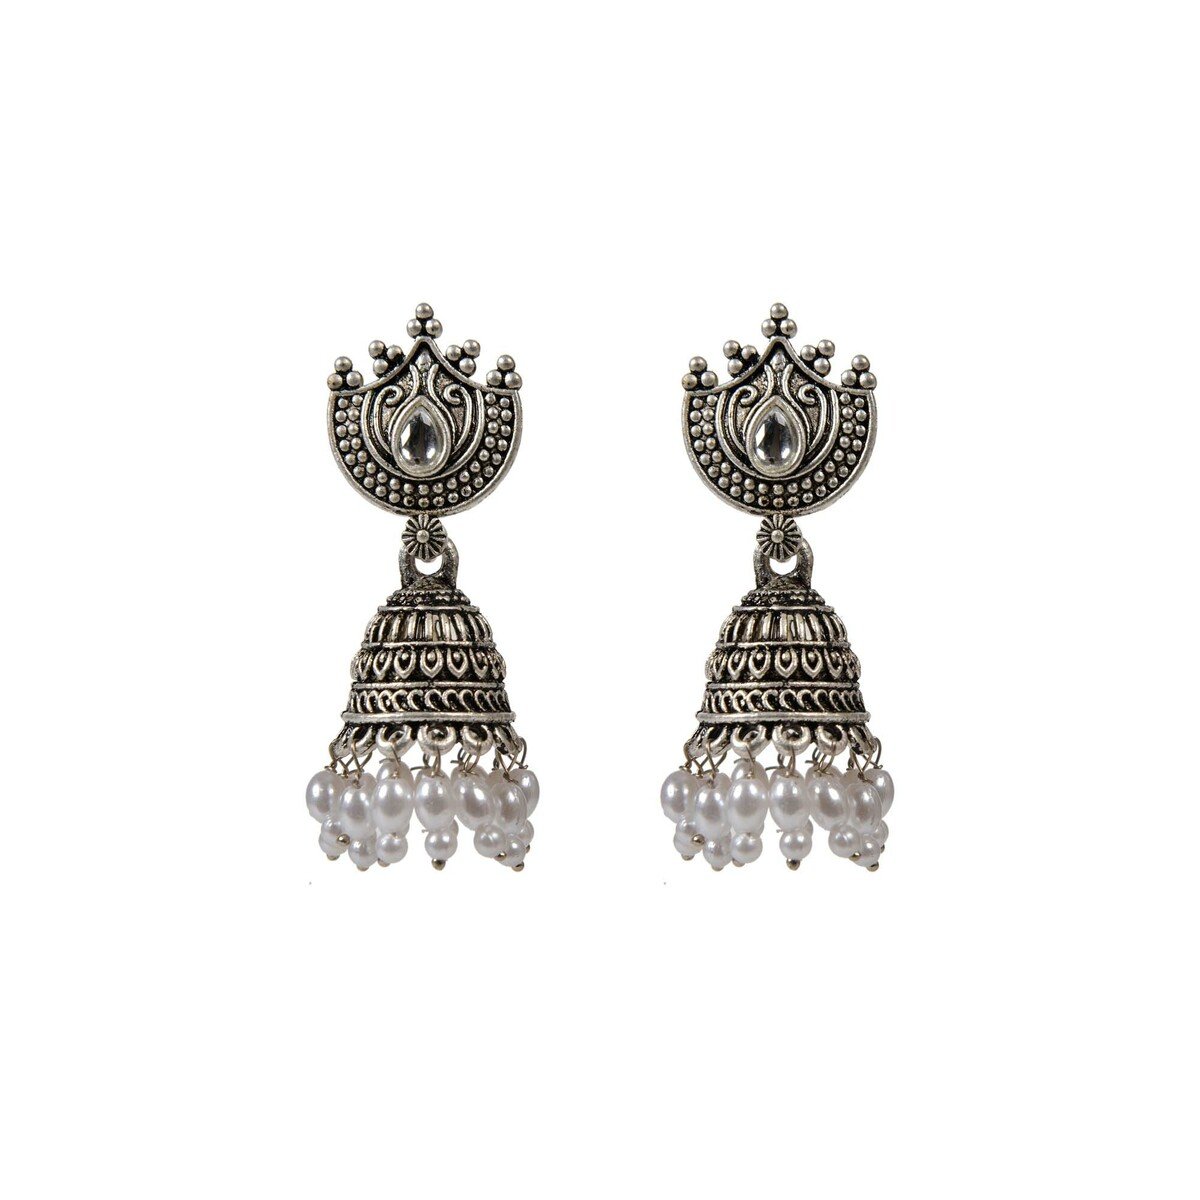 Eten Traditional Ethnic Earrings Antique Oxidized Silver Color WB036